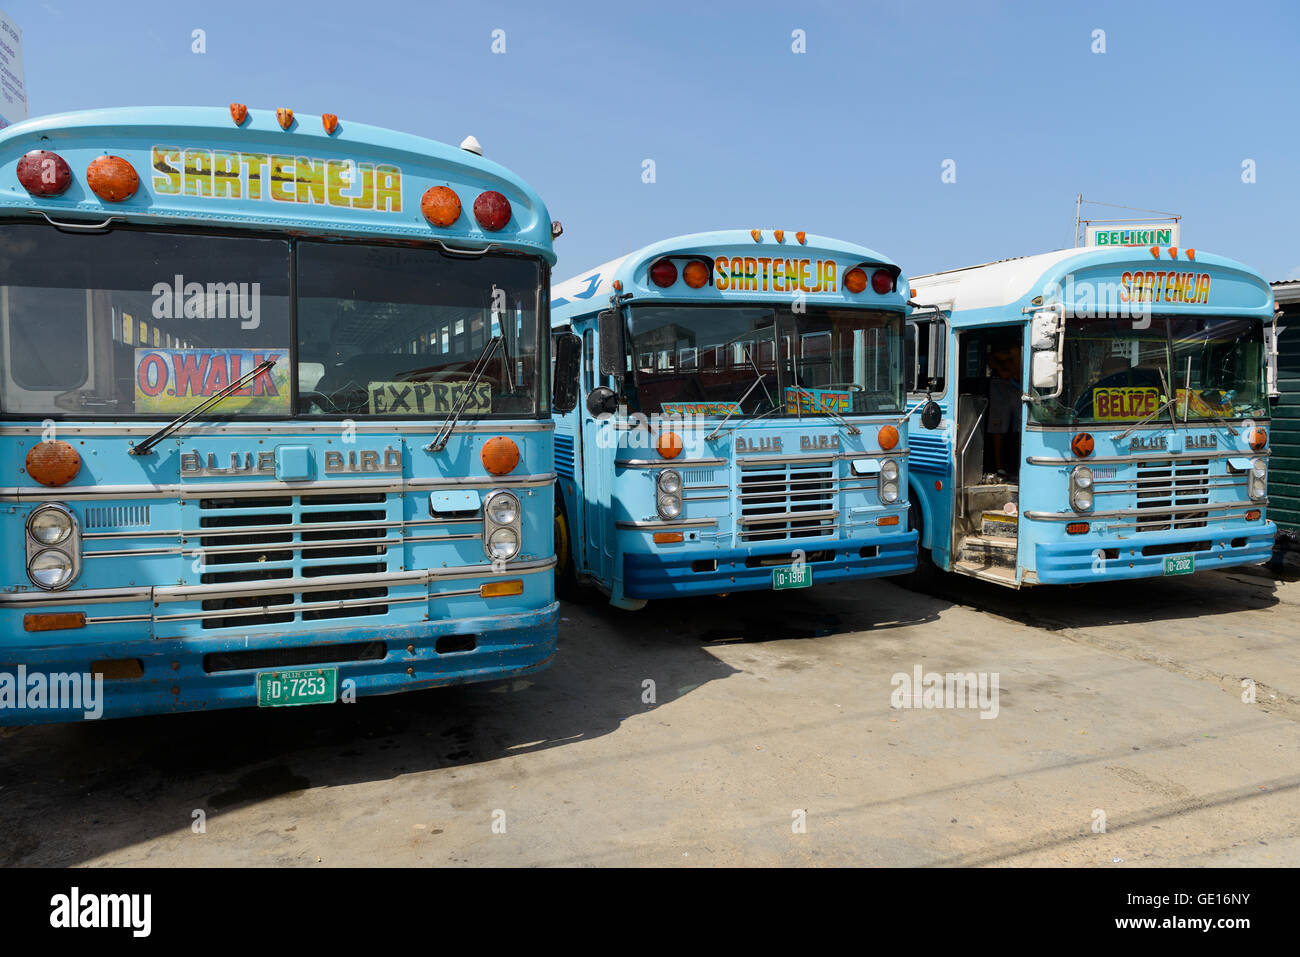 Belize City, Belize - July 14, 2016: Old Blue Bird buses still in service at a bus terminal in Belize City. Stock Photo